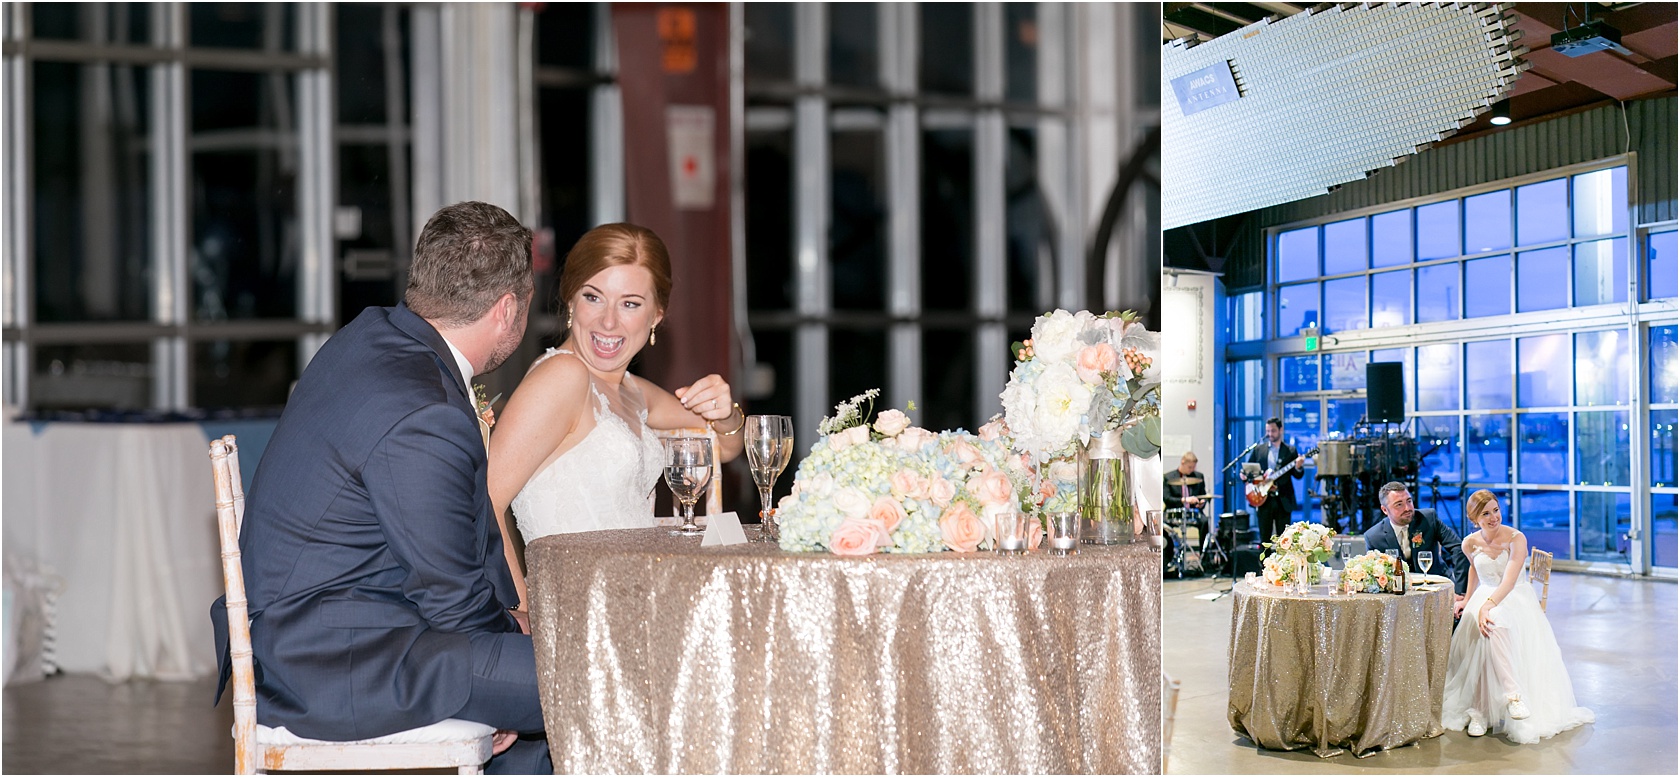 Rowland Baltimore Museum of Industry Wedding Living Radiant Photography photos_0148.jpg